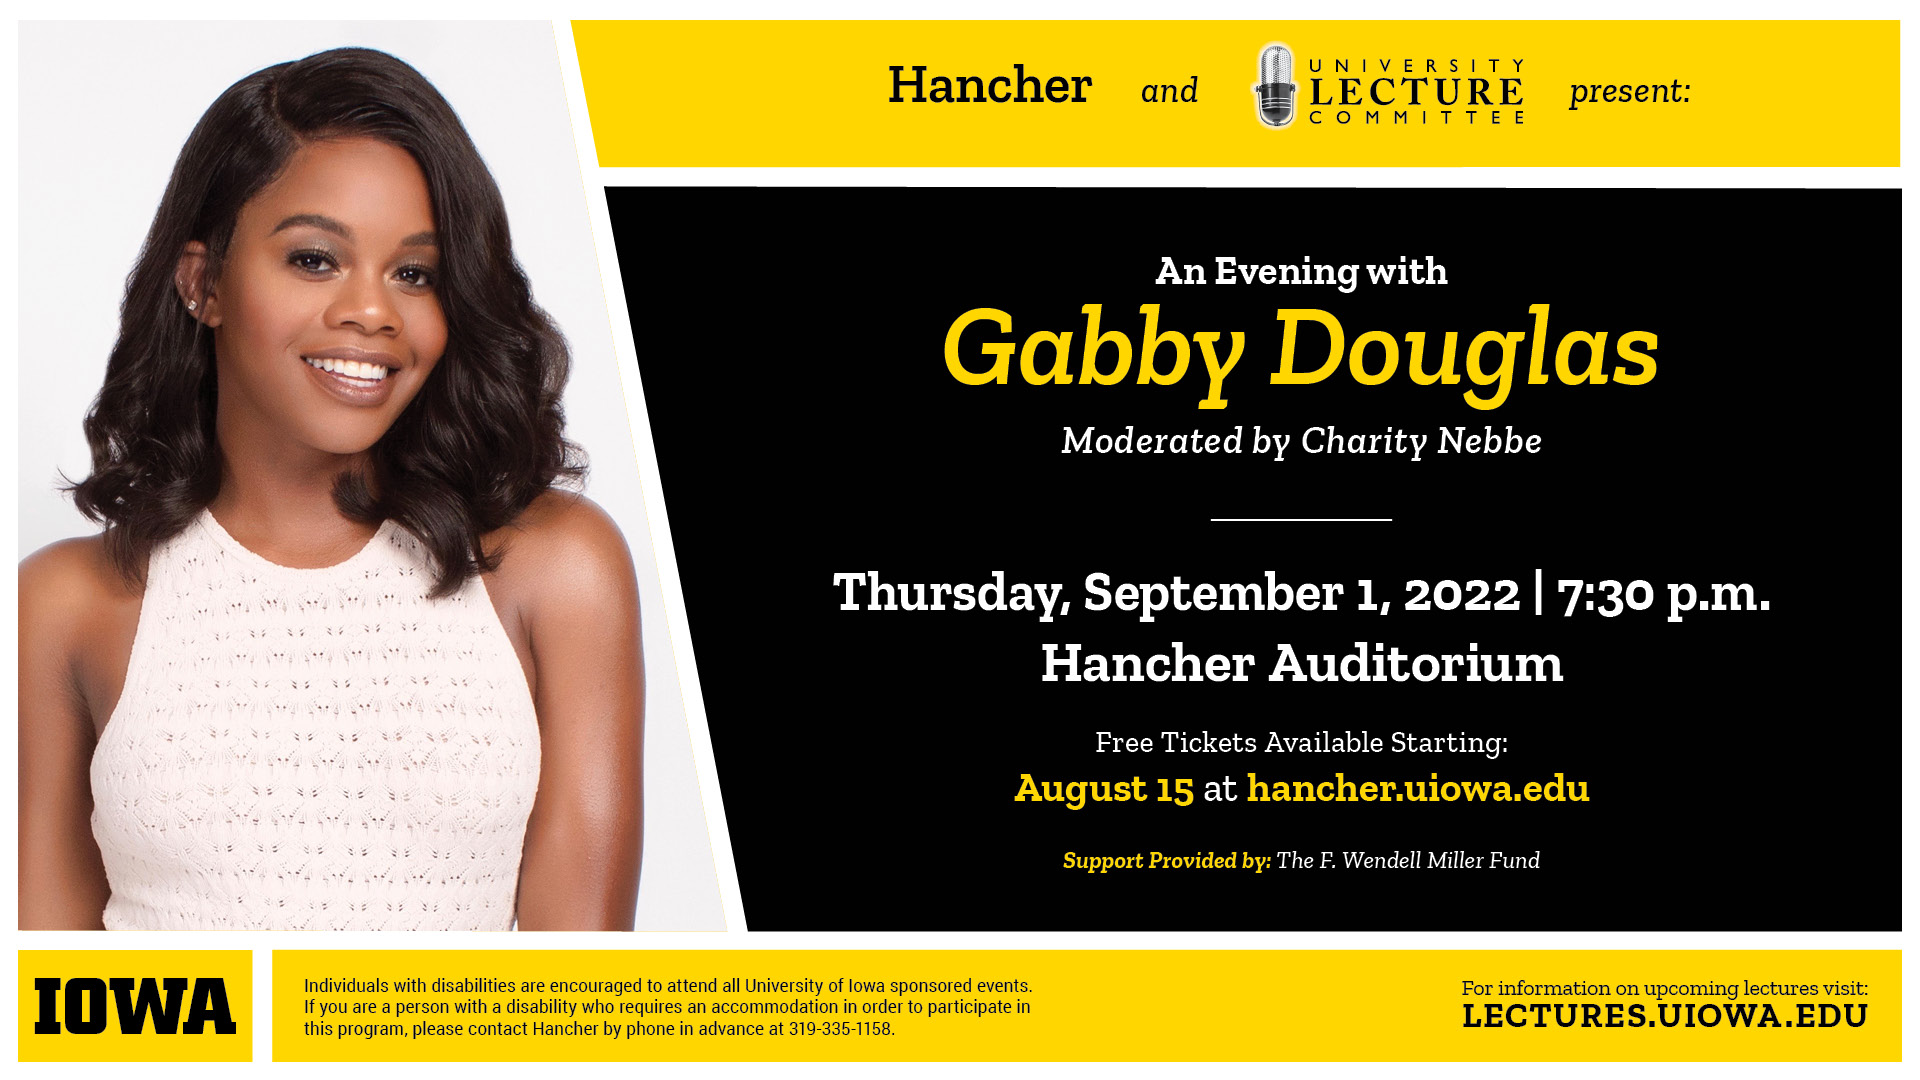 An evening with Gabby Douglas presented by Hancher Auditorium and the University Lecture Committee. tickets available now! visit lectures.uiowa.edu for more information